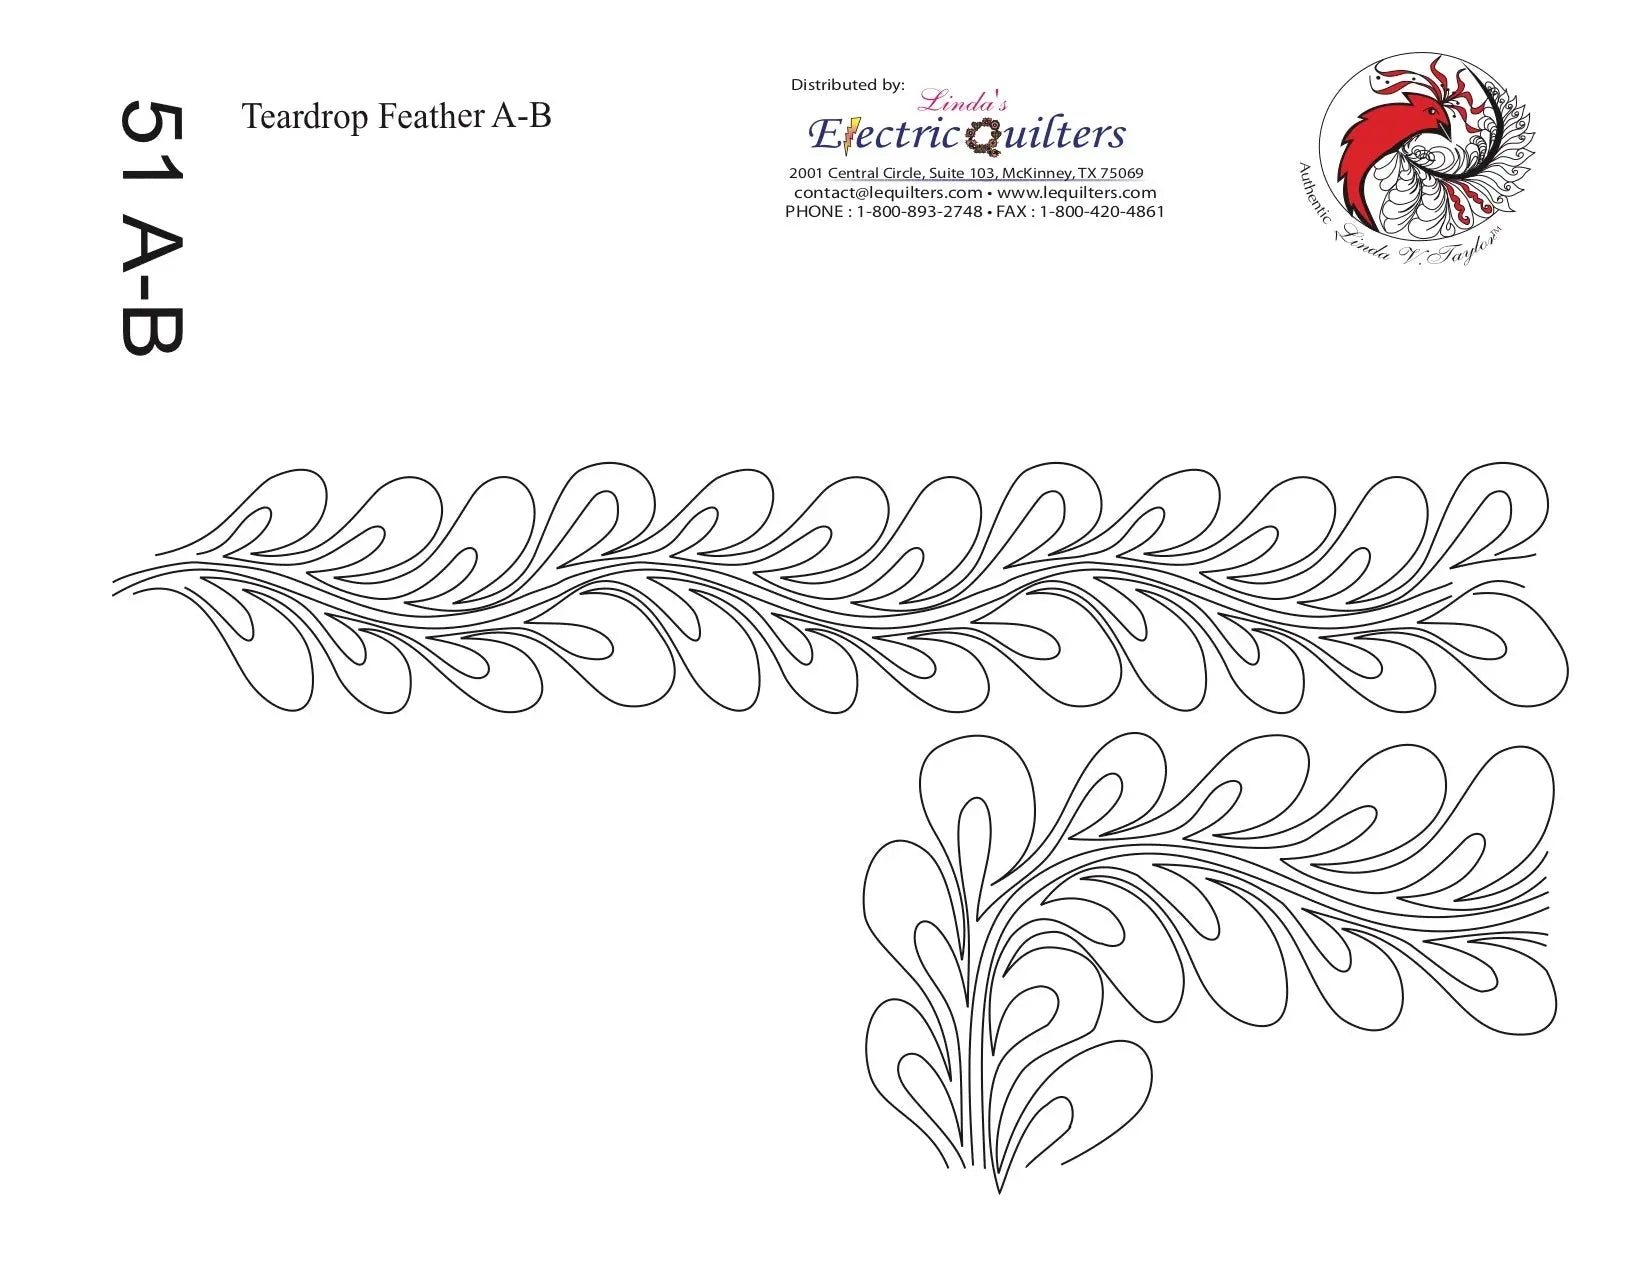 051 Teardrop Feather Pantograph by Linda V. Taylor - Linda's Electric Quilters